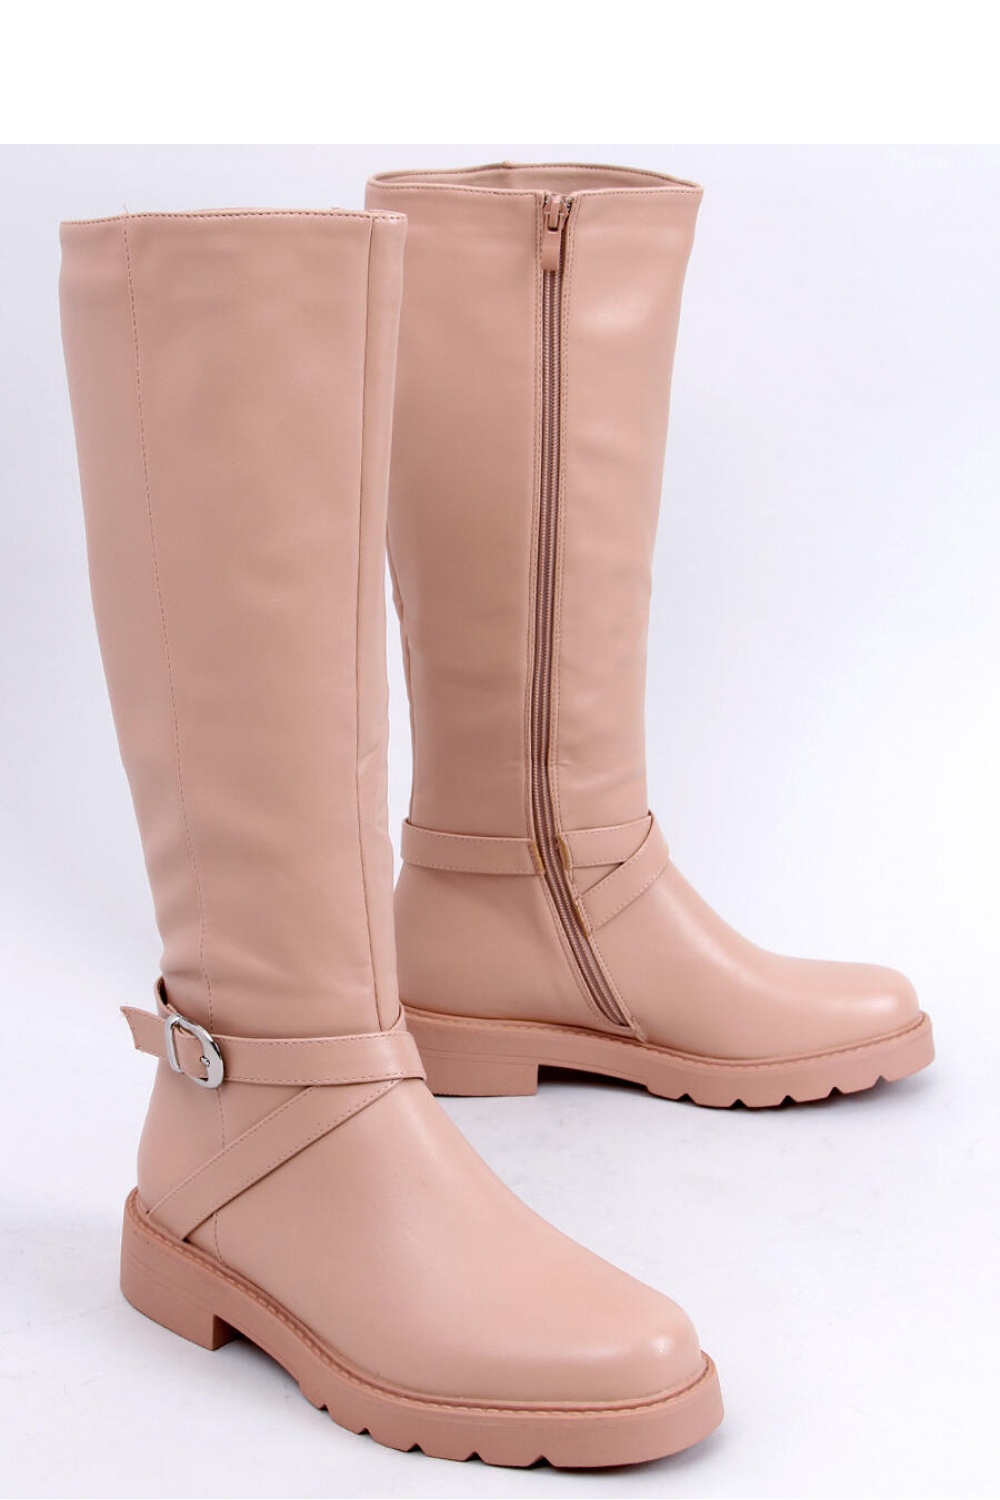  Officer boots model 172583 Inello  beige